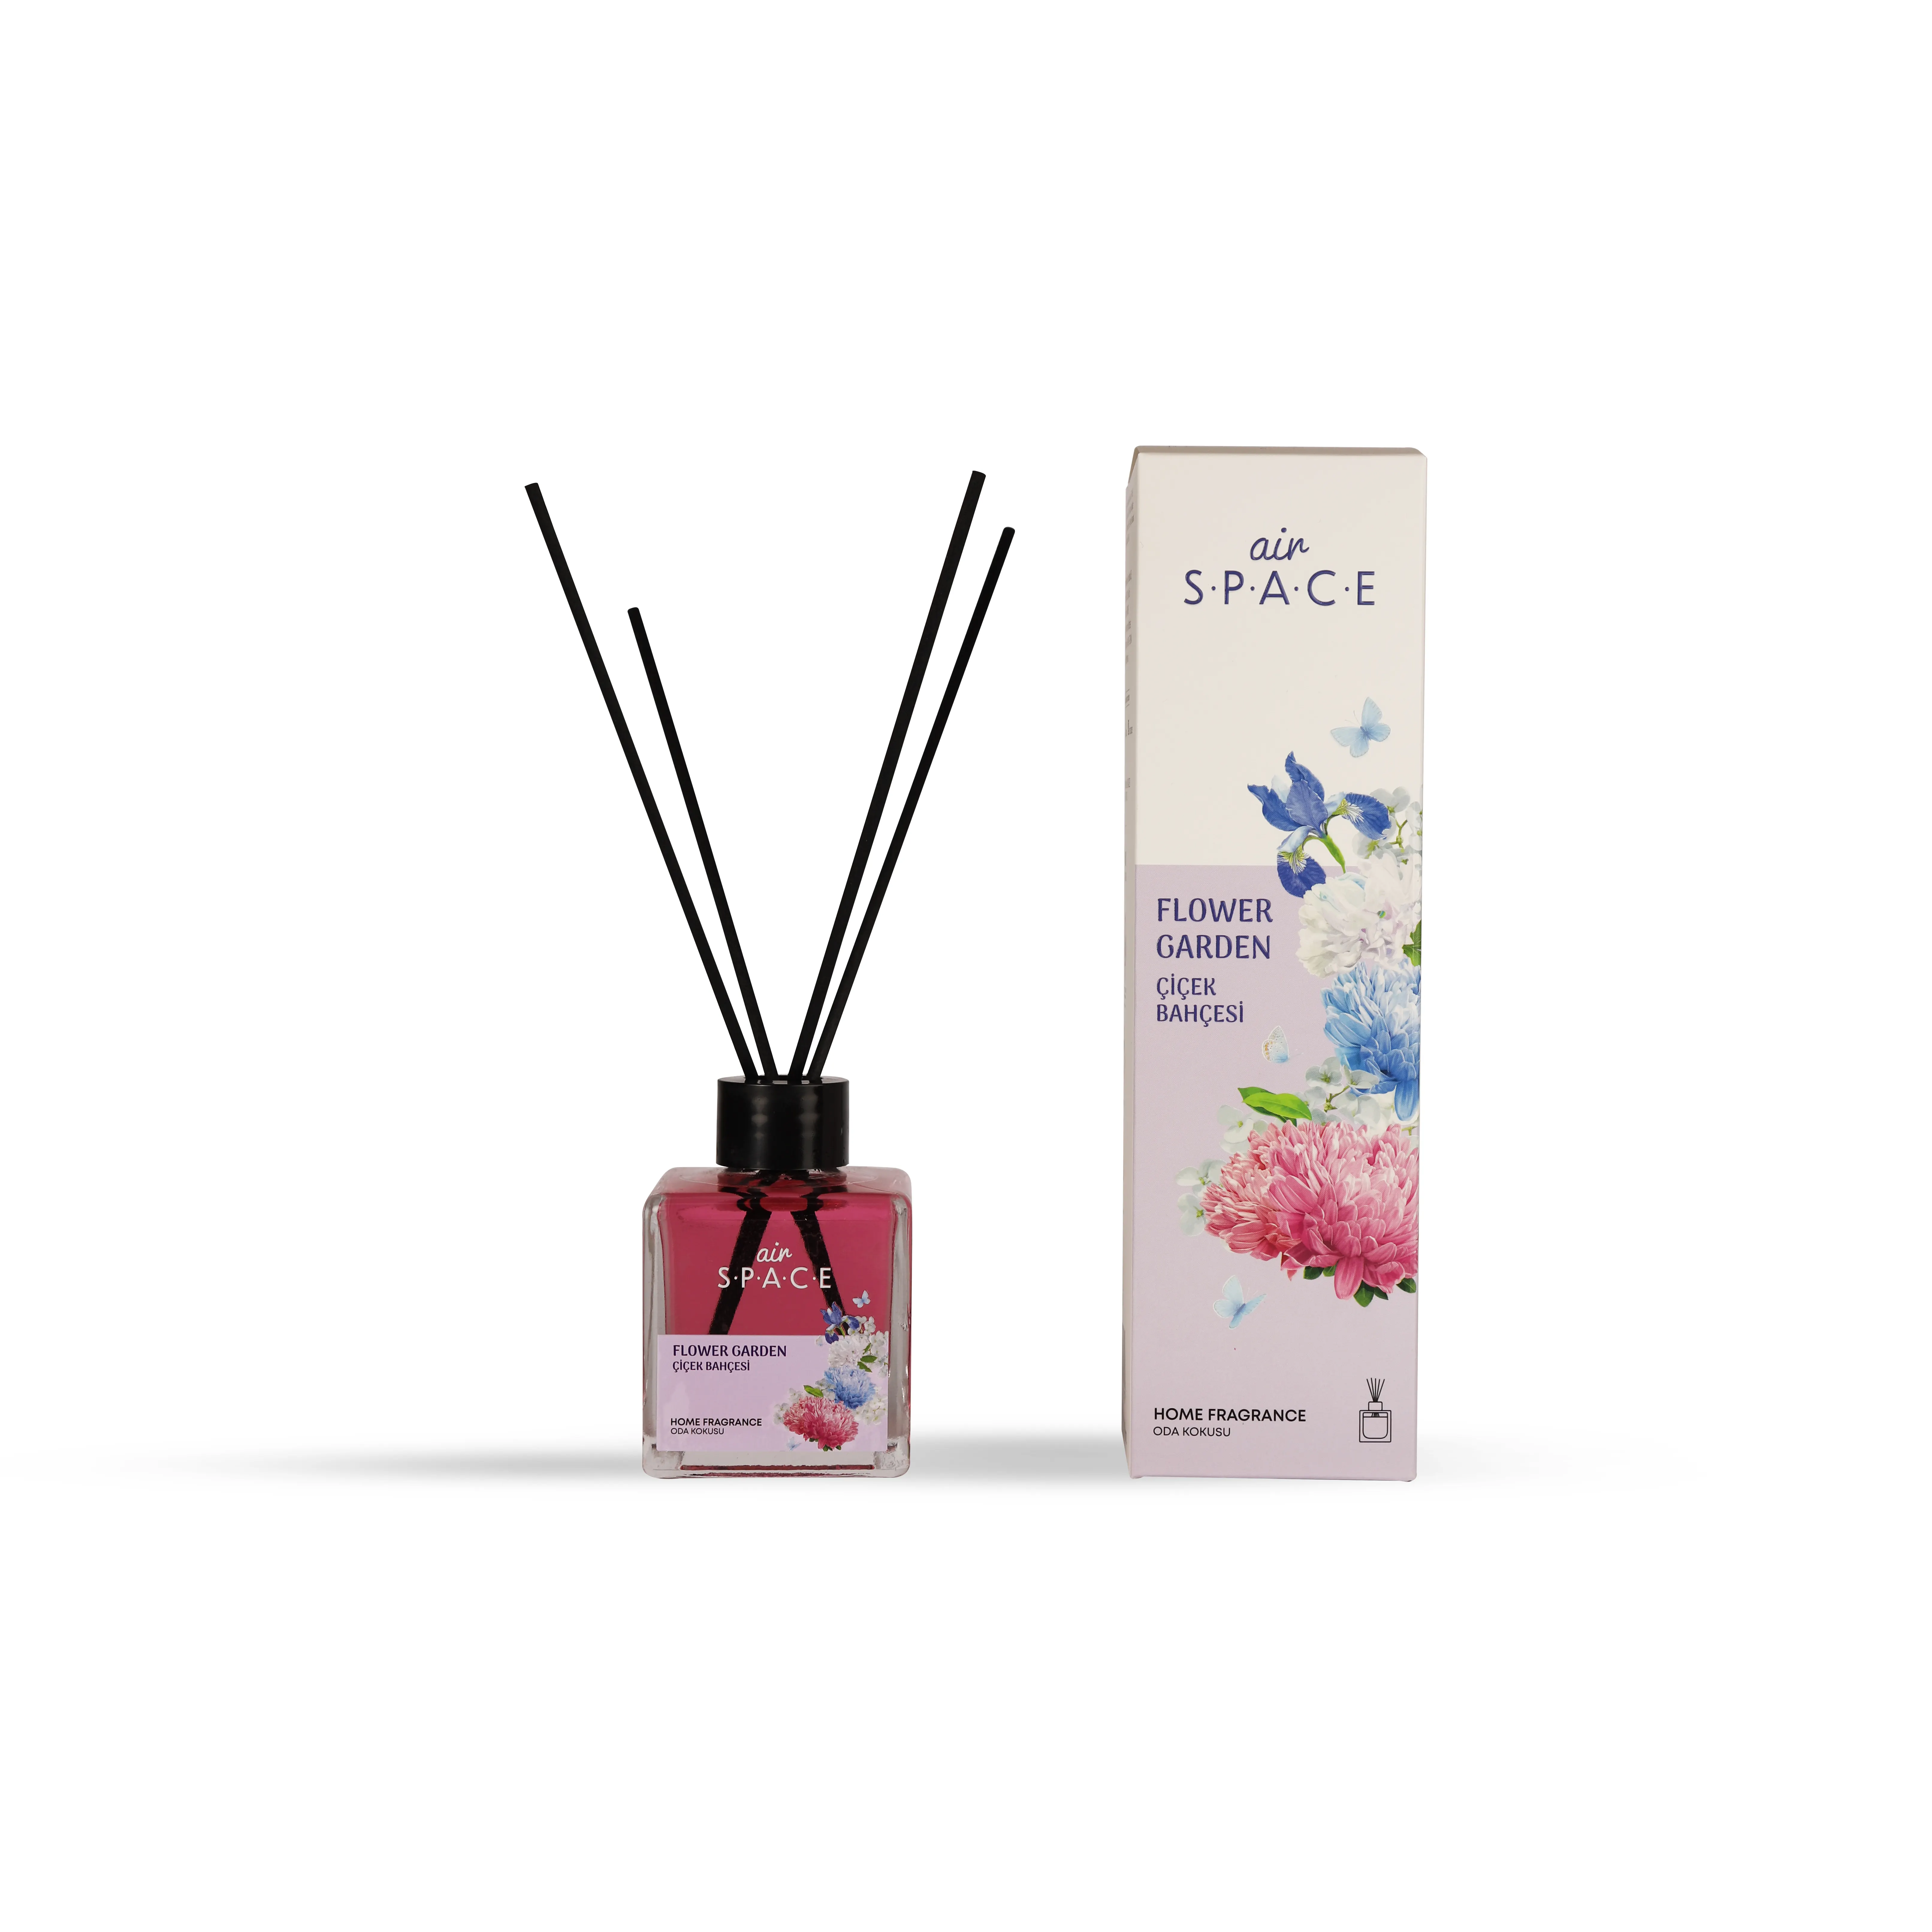 100 ML Air Space Flower Garden Fragrance Home Fragrance Reed Diffuser Aromatic Scent with Fiber Sticks Made in Turkiye